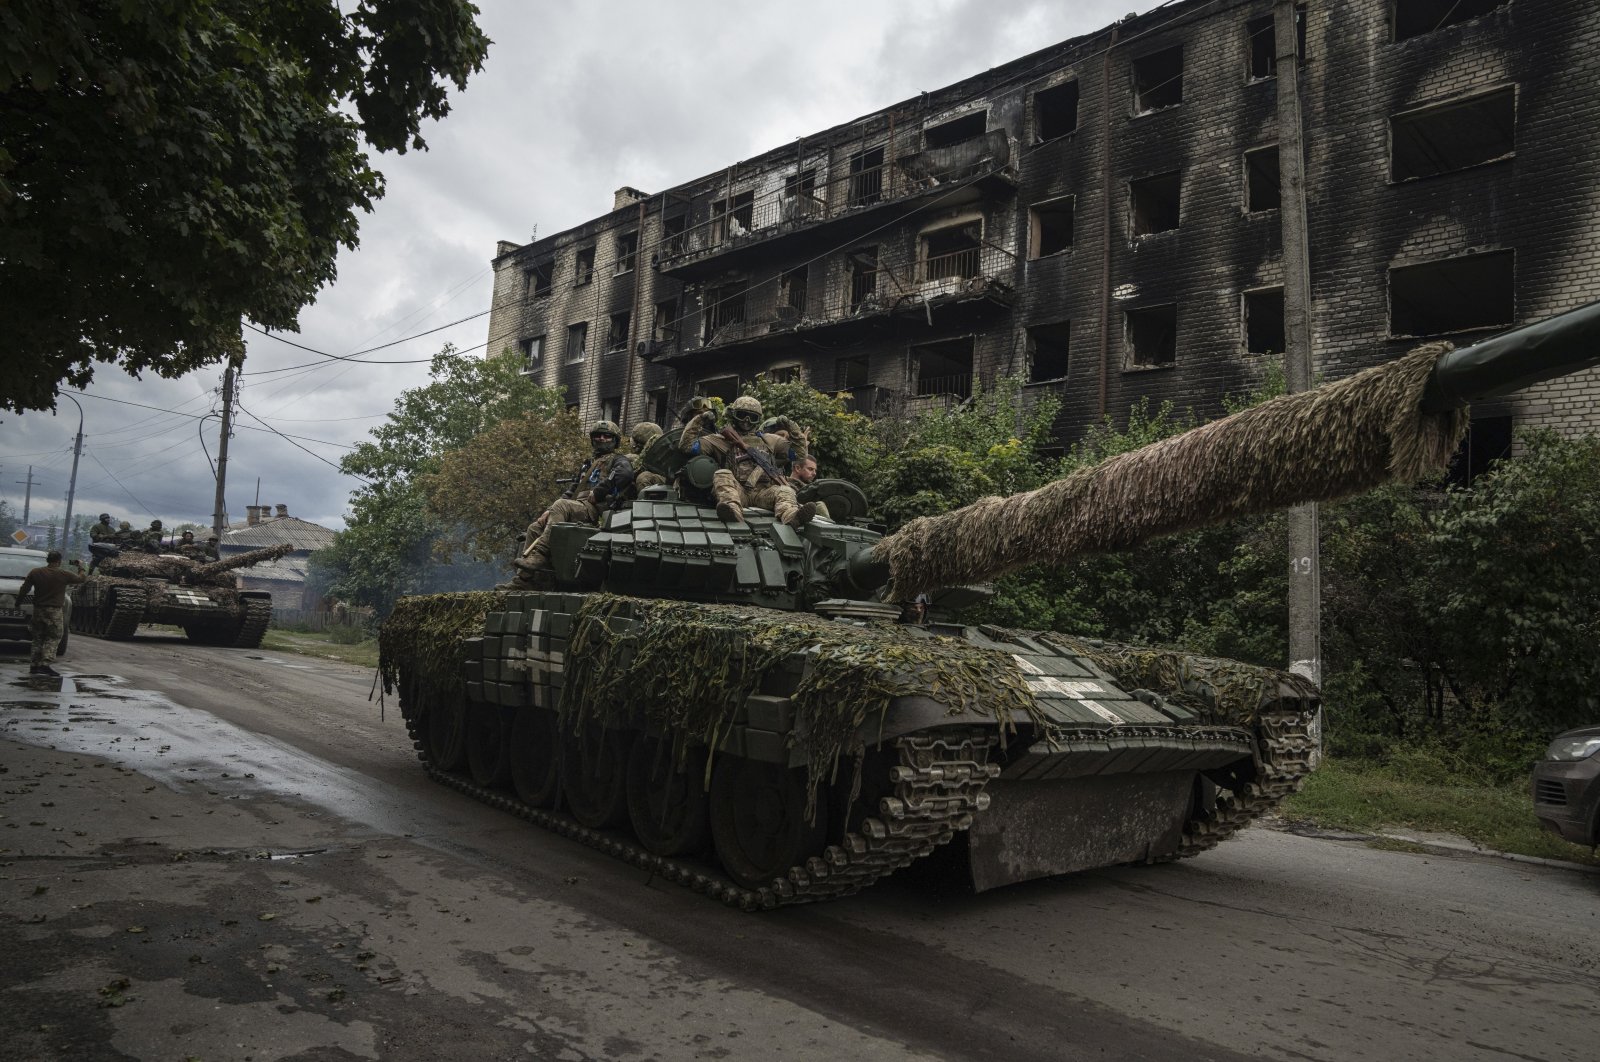 Ukrainian officers ride atop a tank in the recently recaptured city of Izium, Ukraine, Sept. 14, 2022. (AP Photo)